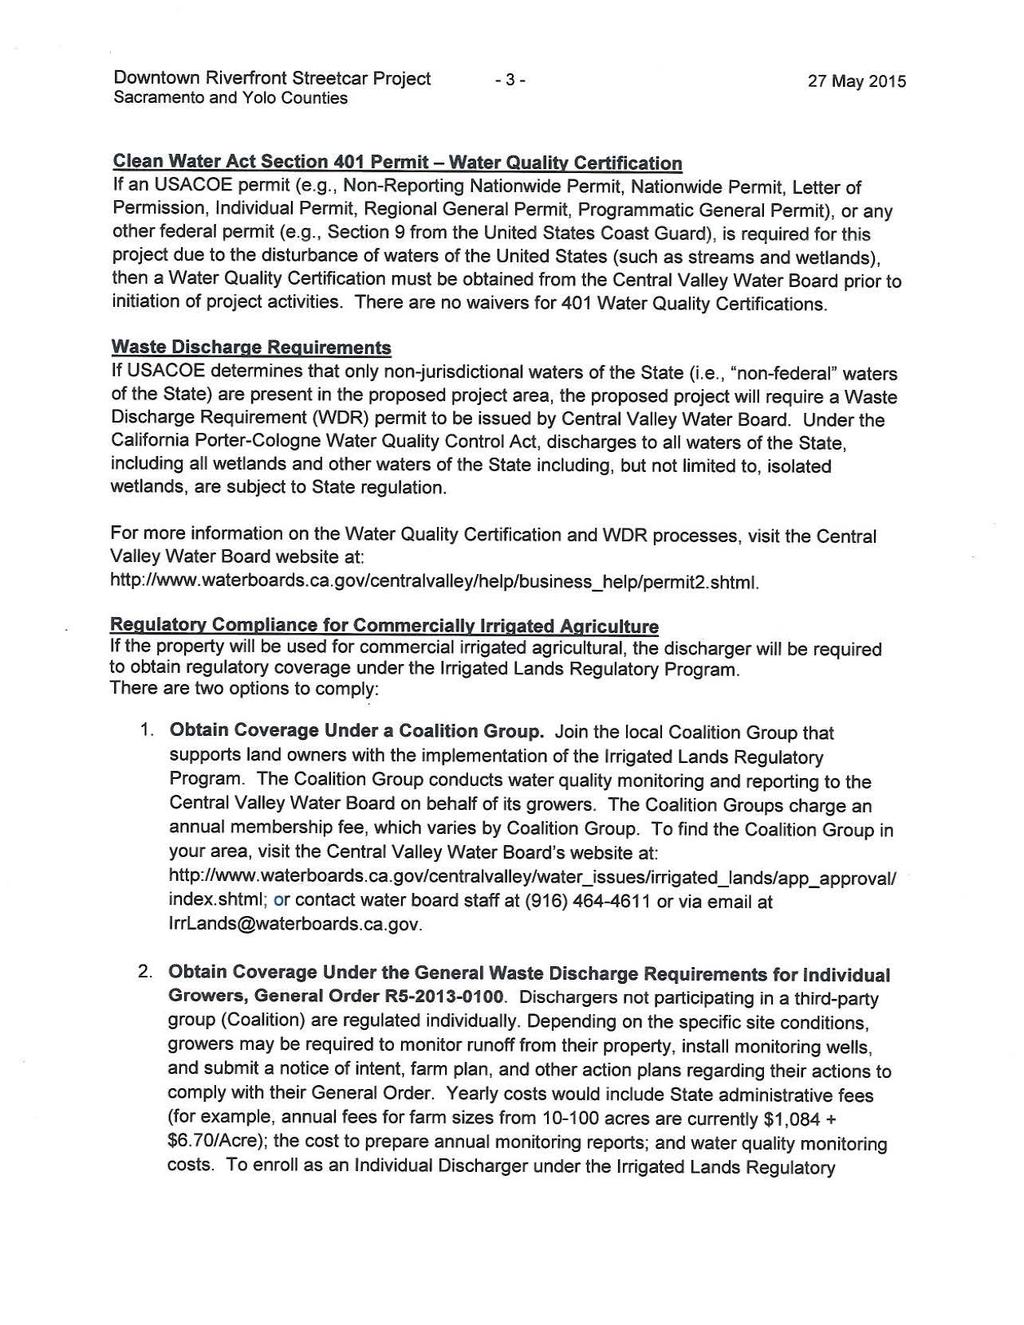 LETTER 1 - CENTRAL VALLEY REGIONAL WATER QUALITY CONTROL BOARD Downtown Riverfront Streetcar Project Sacramento and Yolo Counties -3-27 May 2015 Clean Water Act Section 401 Permit-Water Quality